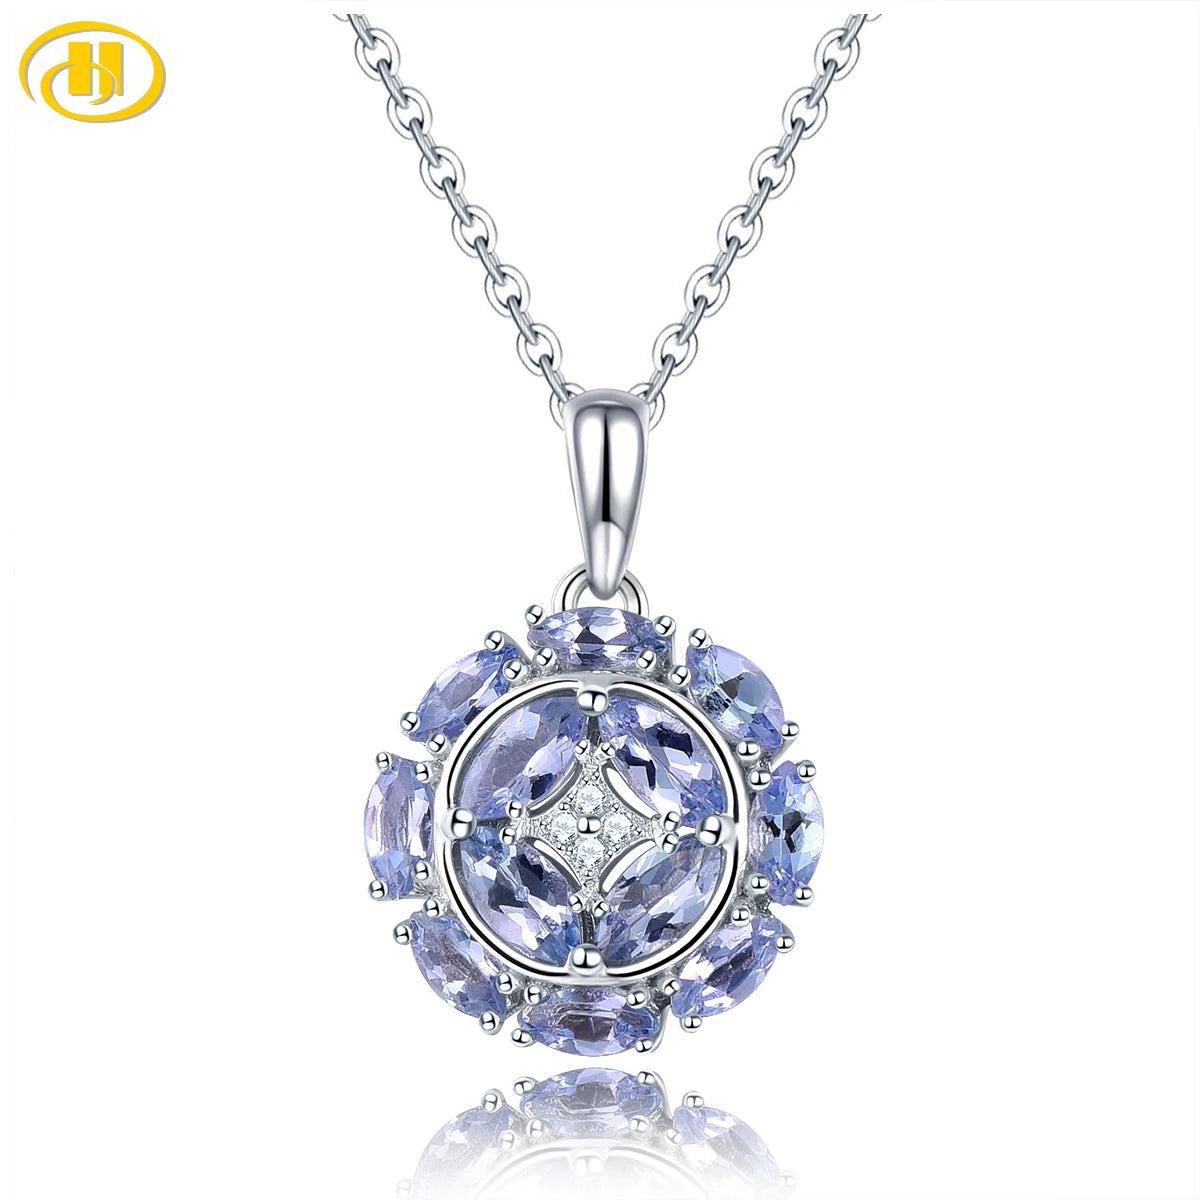 Natural Tanzanite Solid Silver Pendants 1.3 Carats Genuine Gemstone Women's Classic Charming Style Jewelry Gift for Anniversary Natural Tanzanite